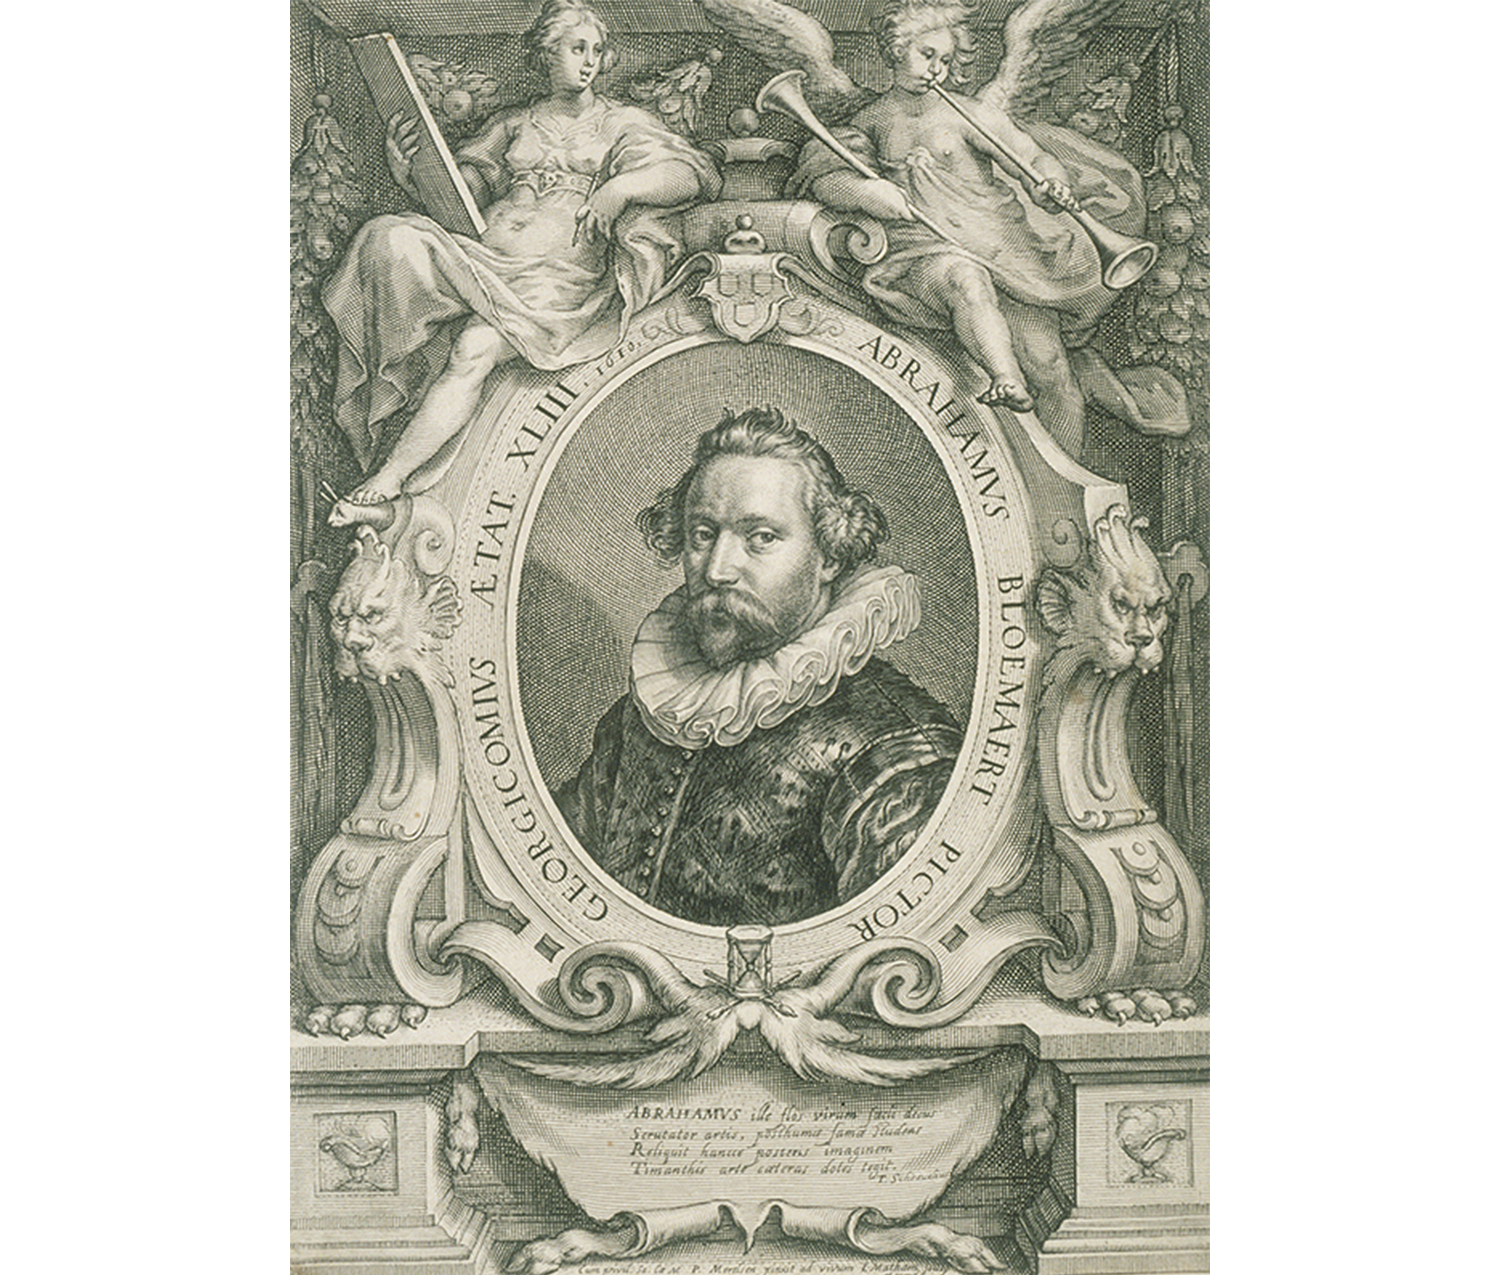 bust portrait of man facing slightly to his right; set in ornate oval frame; 2 angels or people sitting on top of oval; text around oval